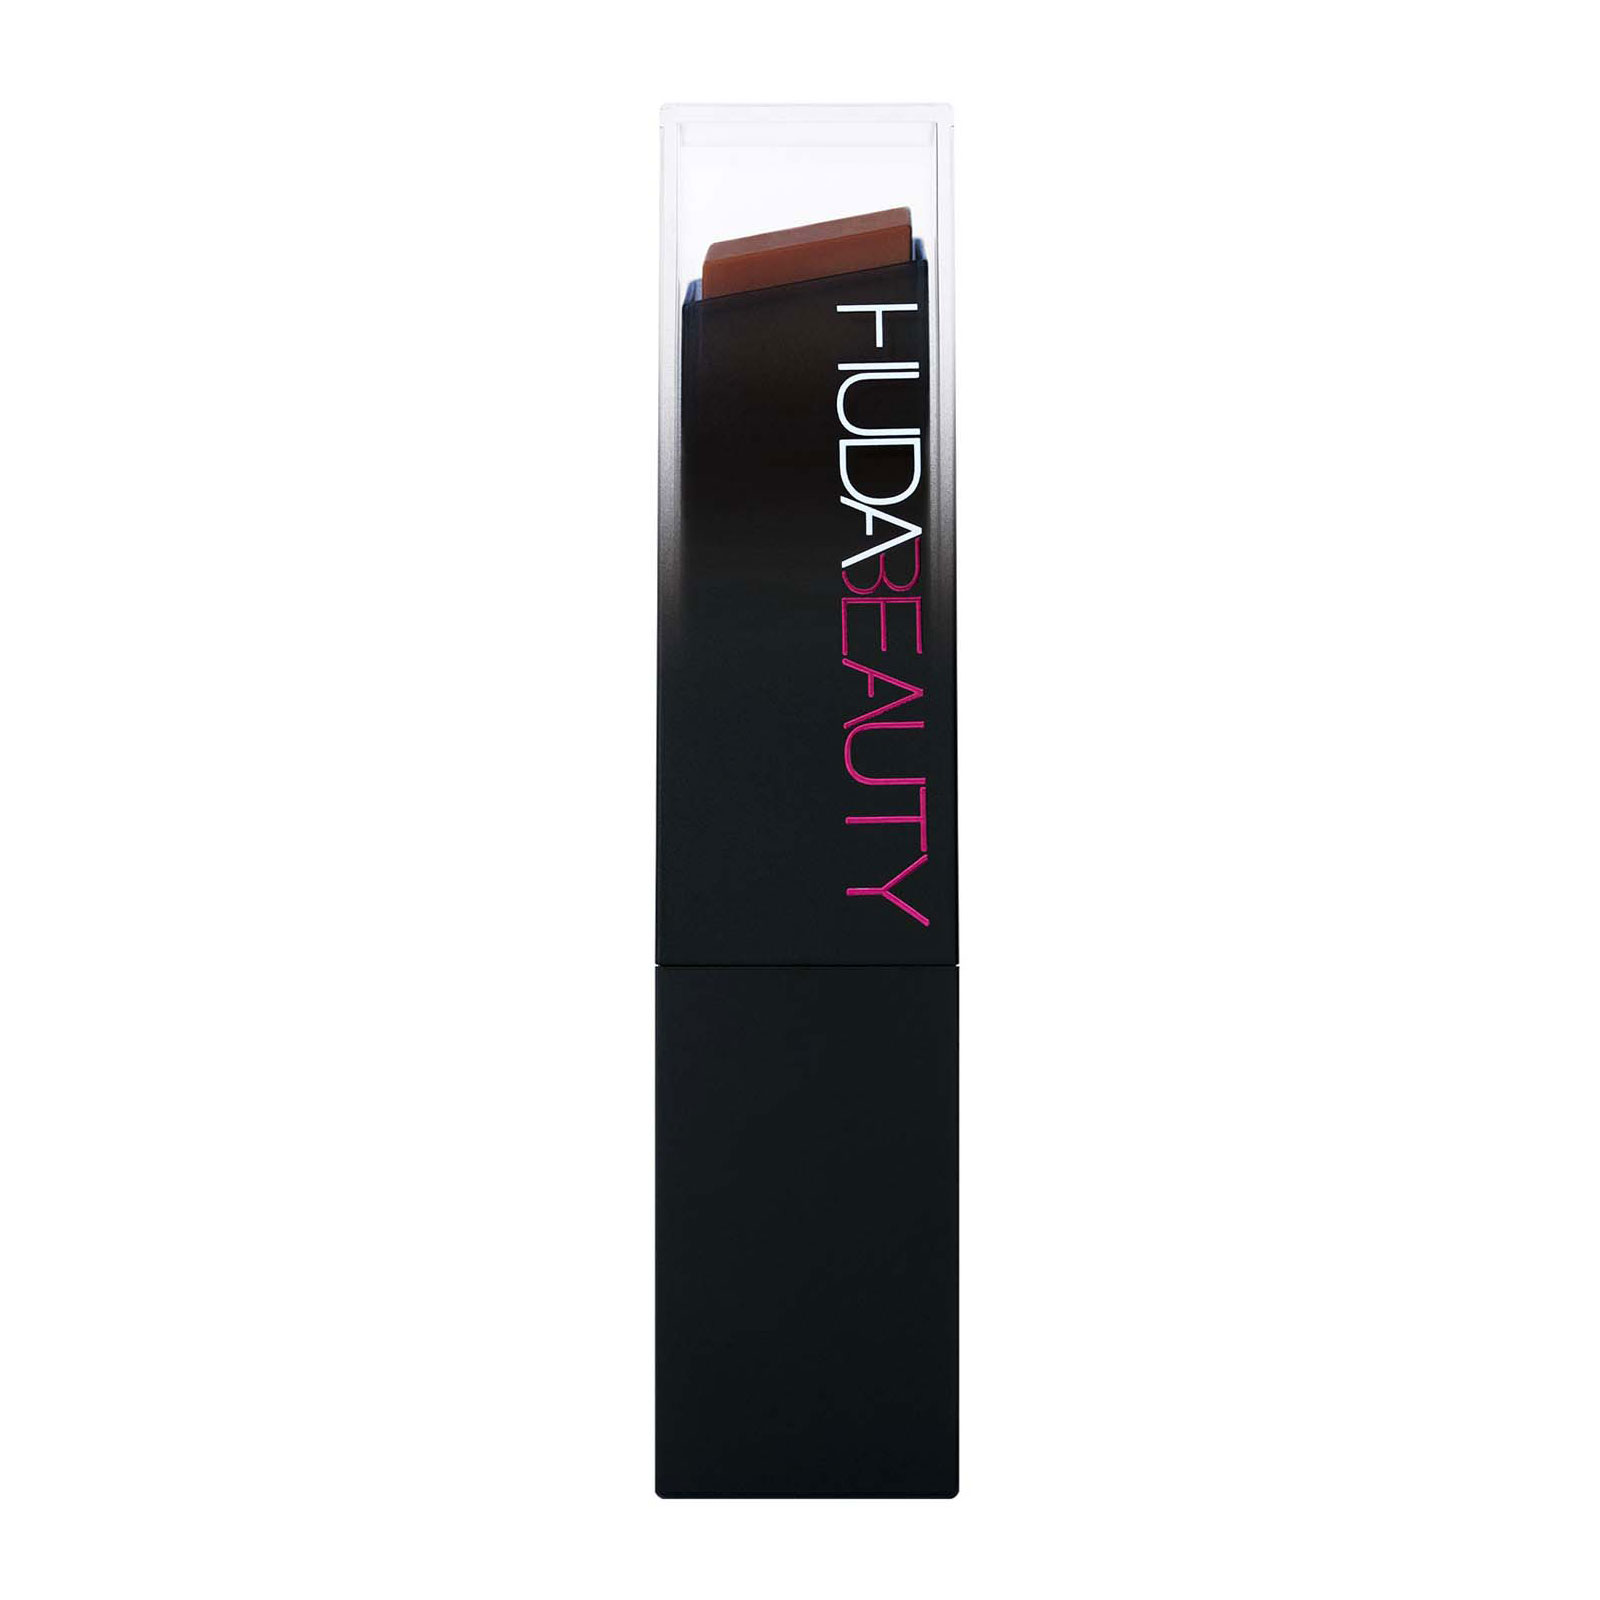 Huda Beauty #Fauxfilter Skin Finish Buildable Coverage Foundation Stick 12.5G Ganache 560 - Red